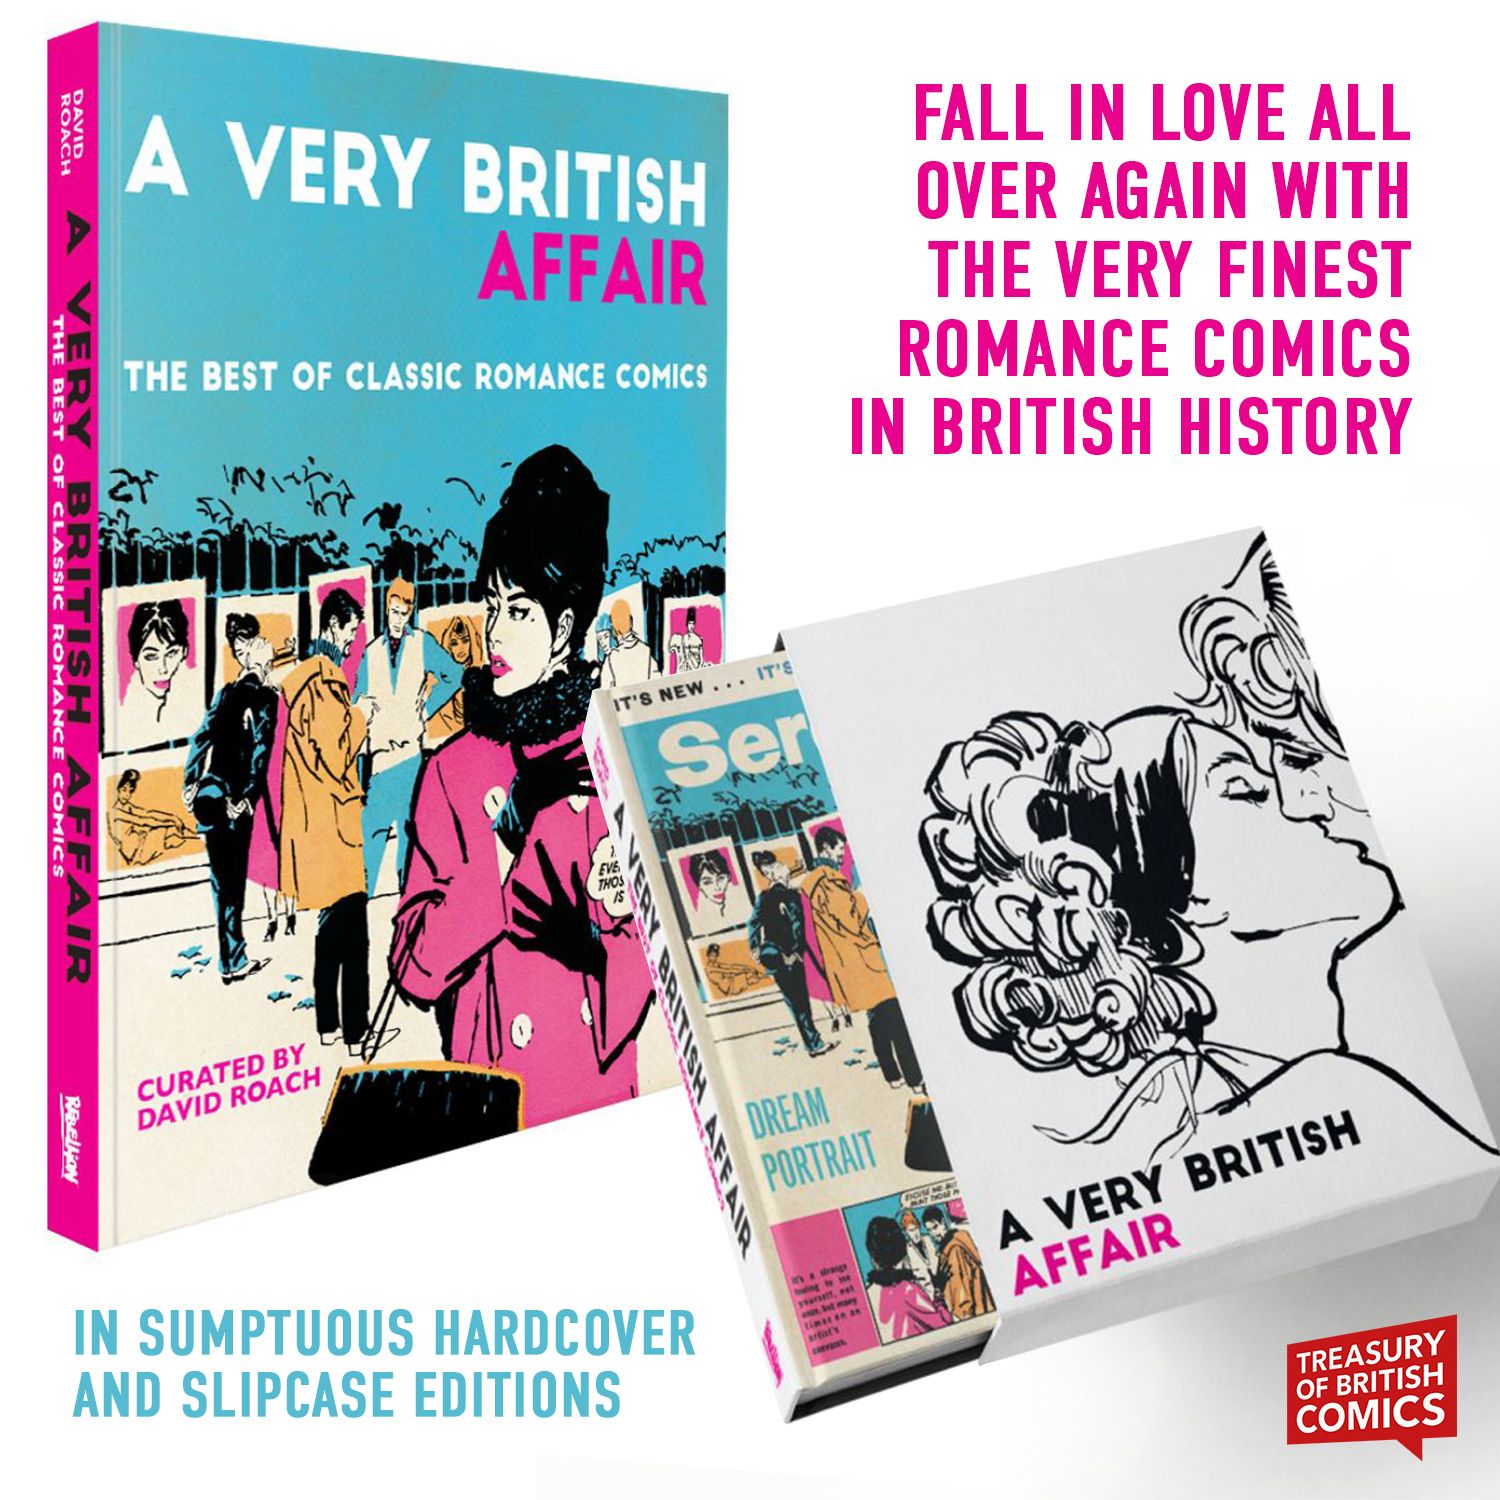 A Very British Affair: Britain’s very finest romance comics out now!